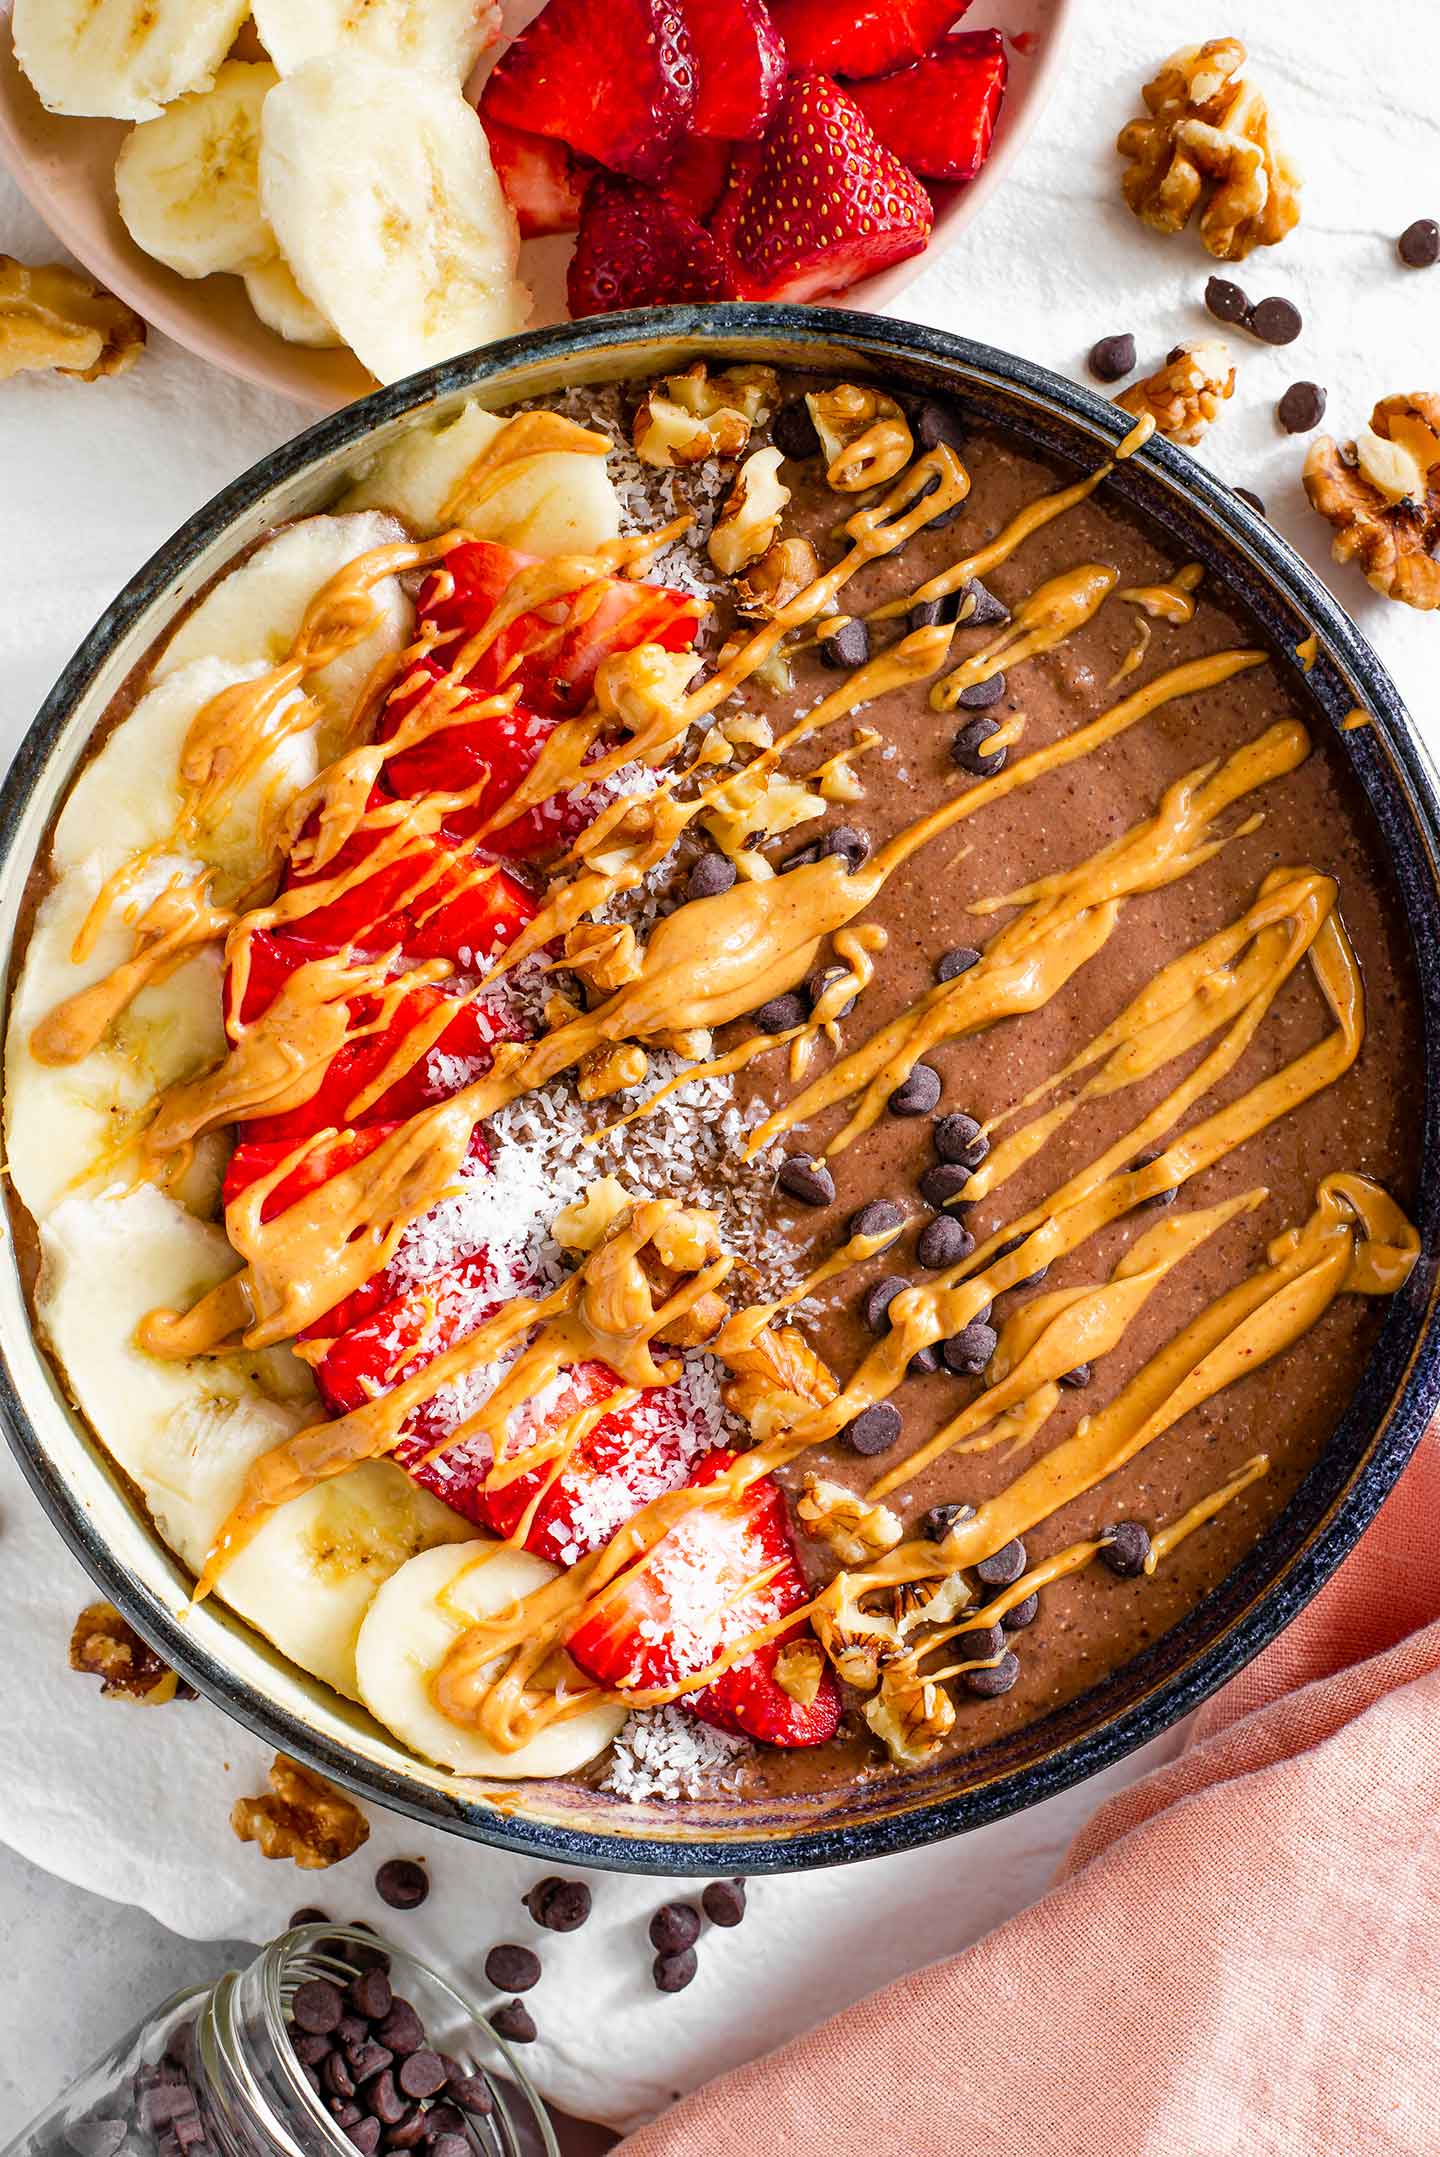 Top down view of a chocolate smoothie bowl topped with banana and strawberry slices, coconut flakes, crushed walnuts, chocolate chips, and drizzled with peanut butter.